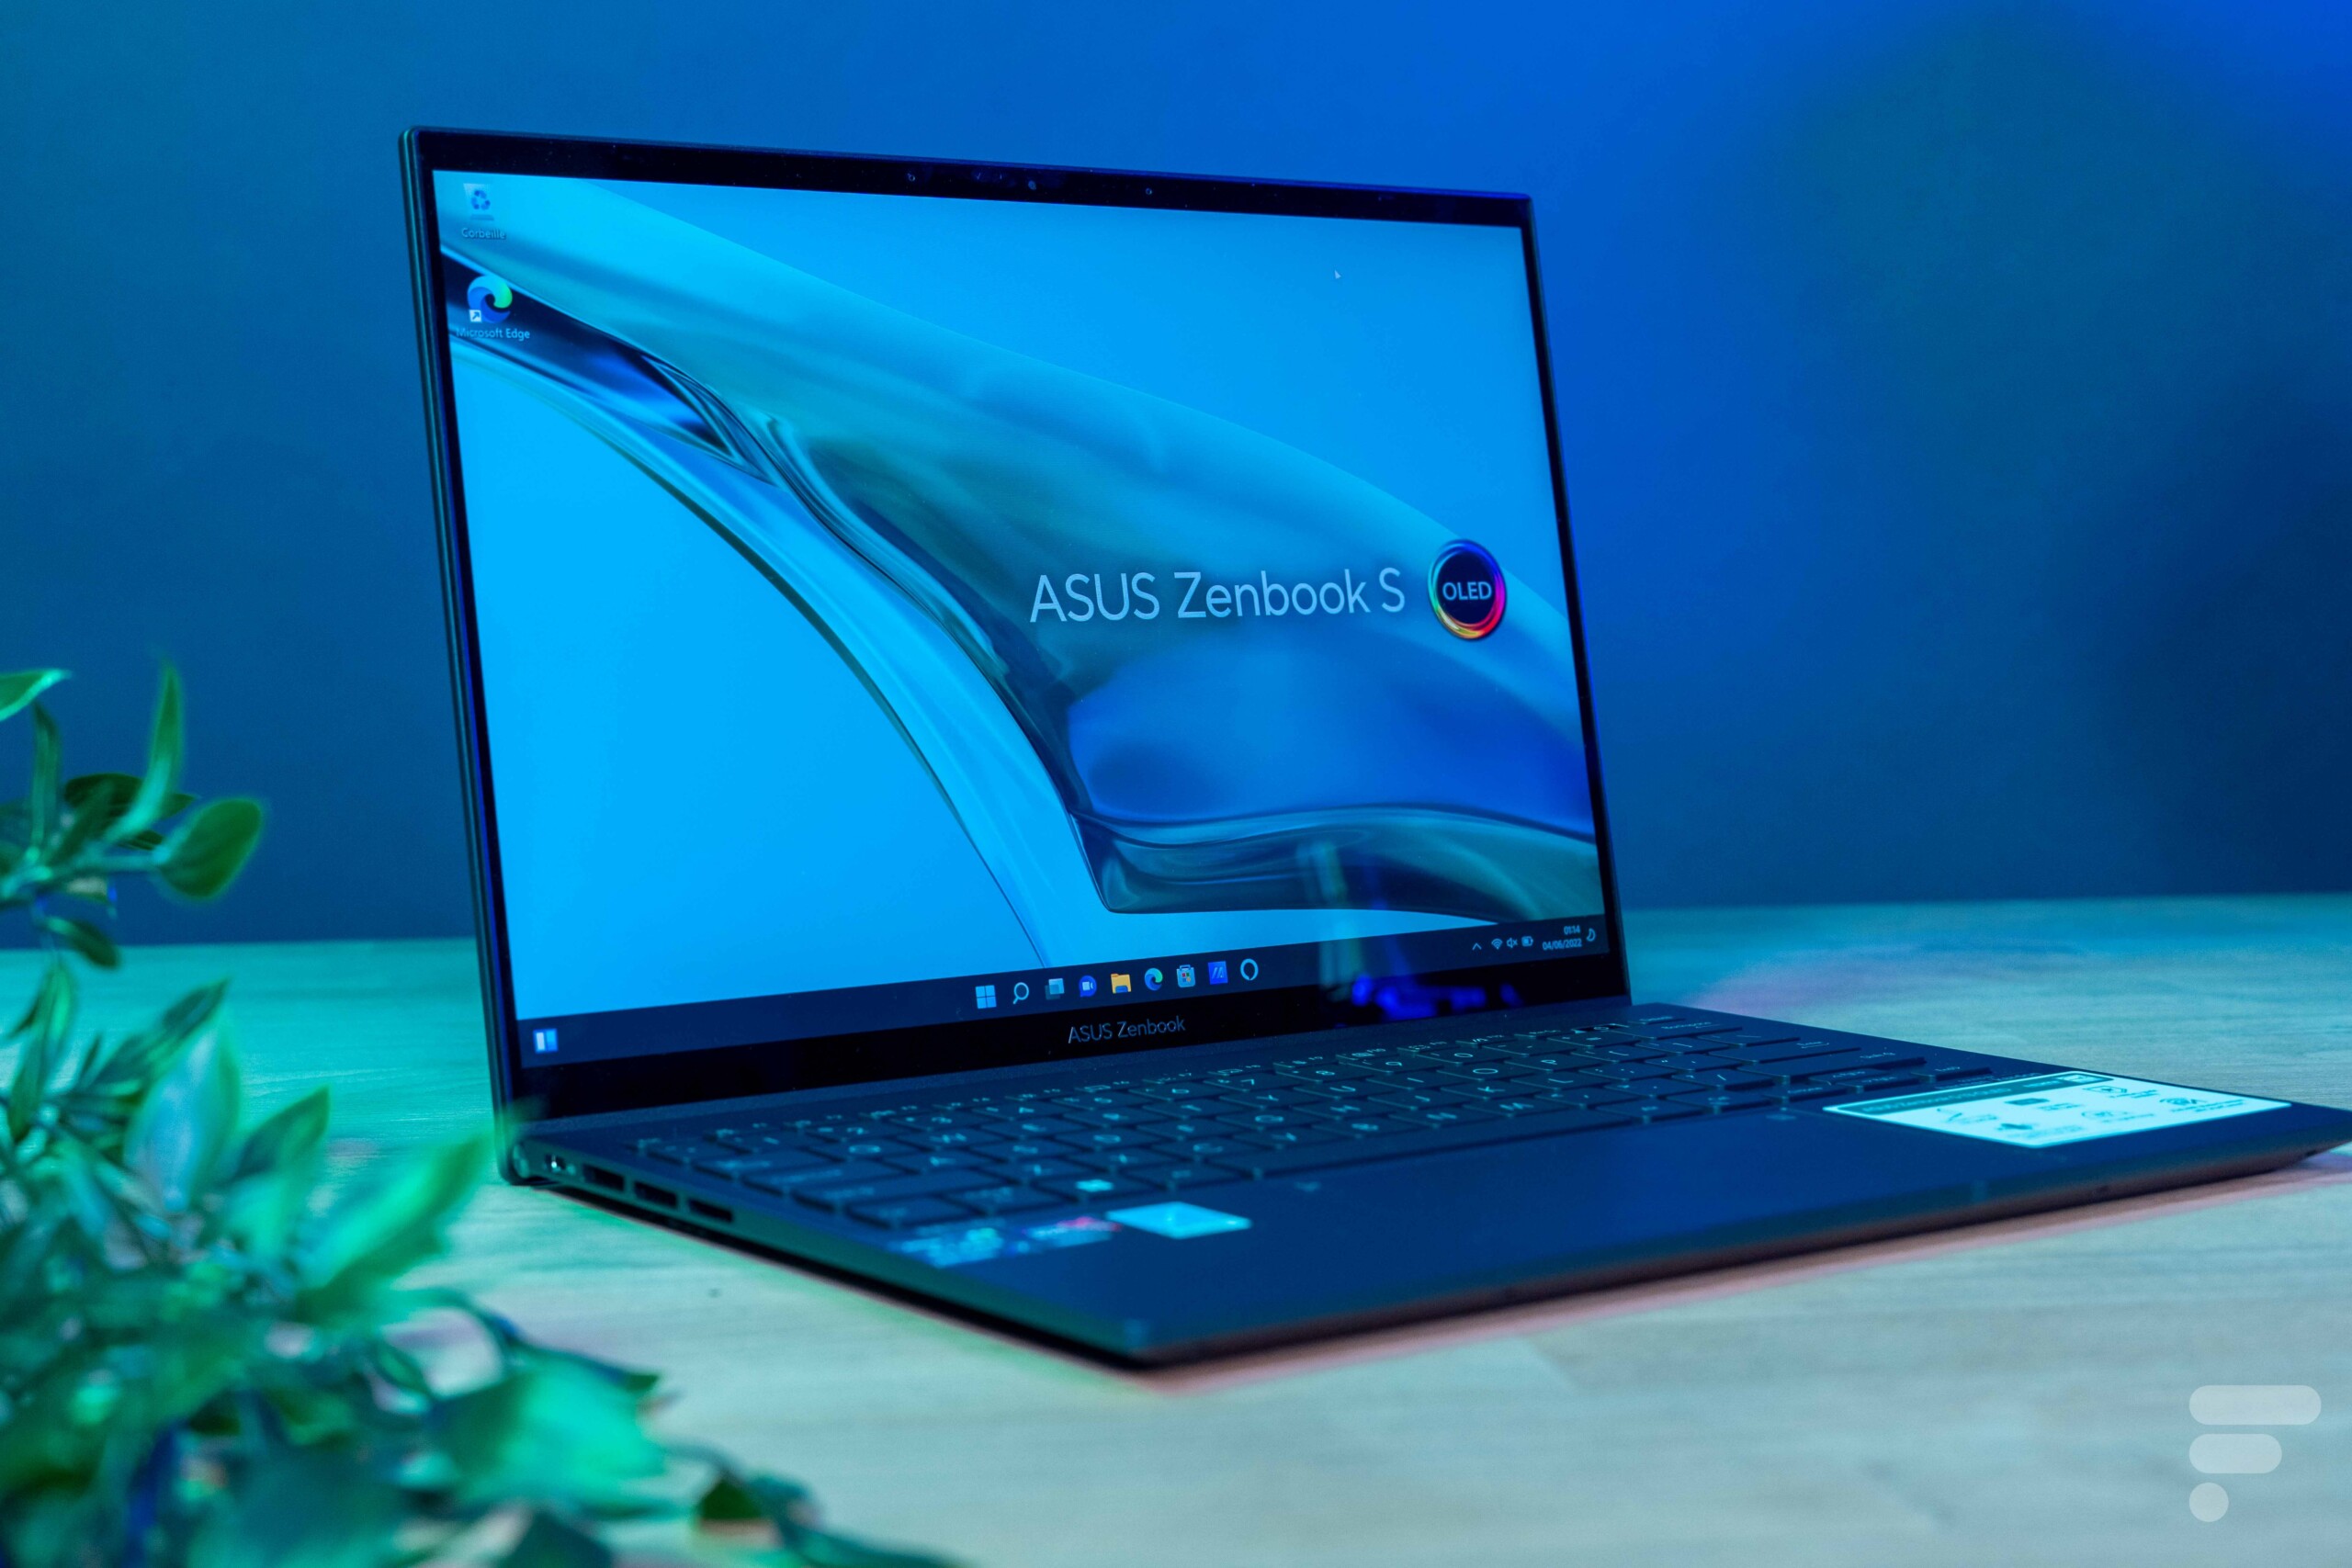 Asus Zenbook S 13 OLED: this powerful laptop (Ryzen 7) loses almost 30% of its price